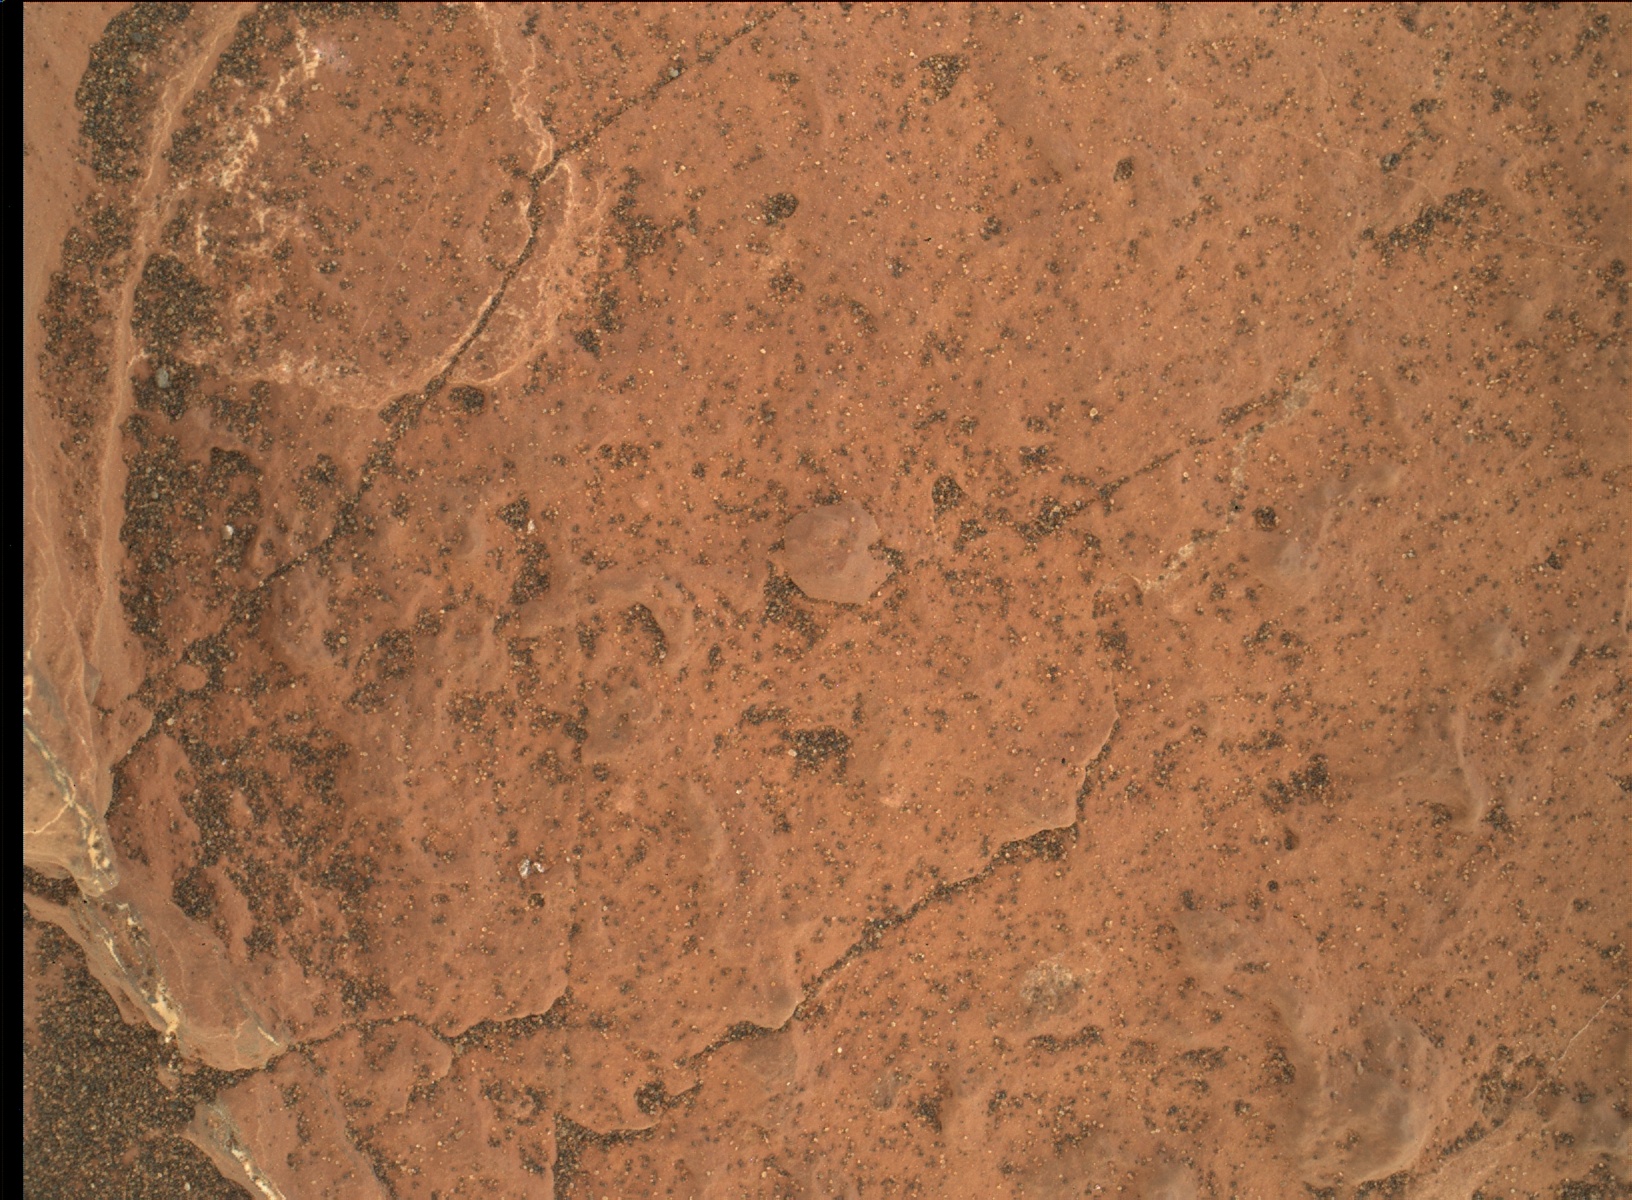 Nasa's Mars rover Curiosity acquired this image using its Mars Hand Lens Imager (MAHLI) on Sol 1598